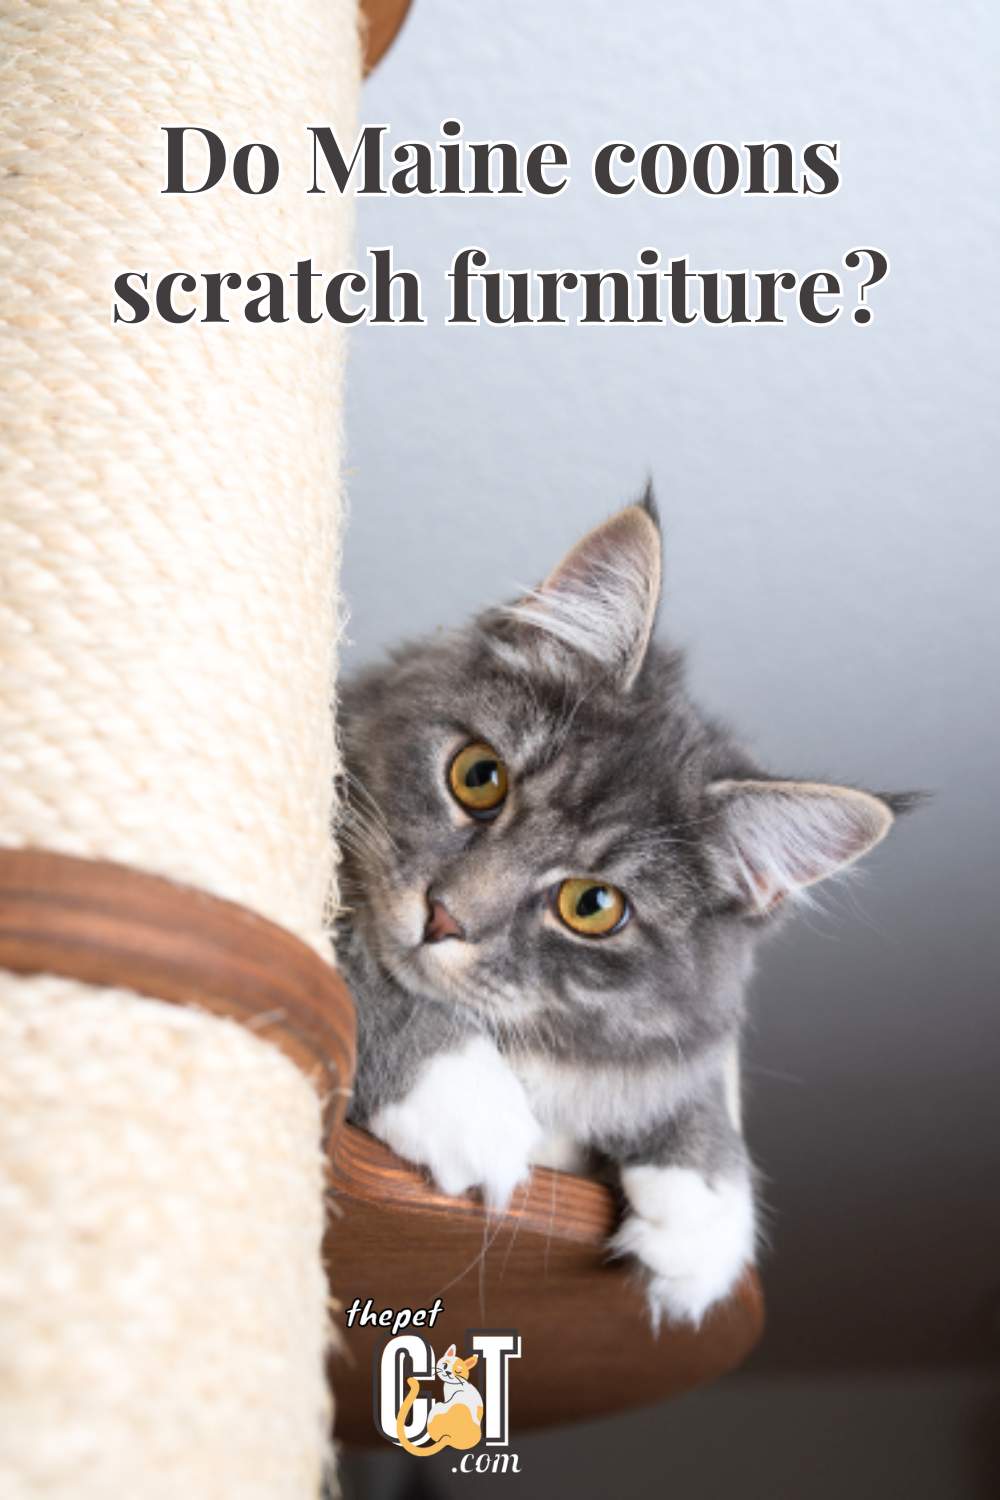 Do Maine coons scratch furniture